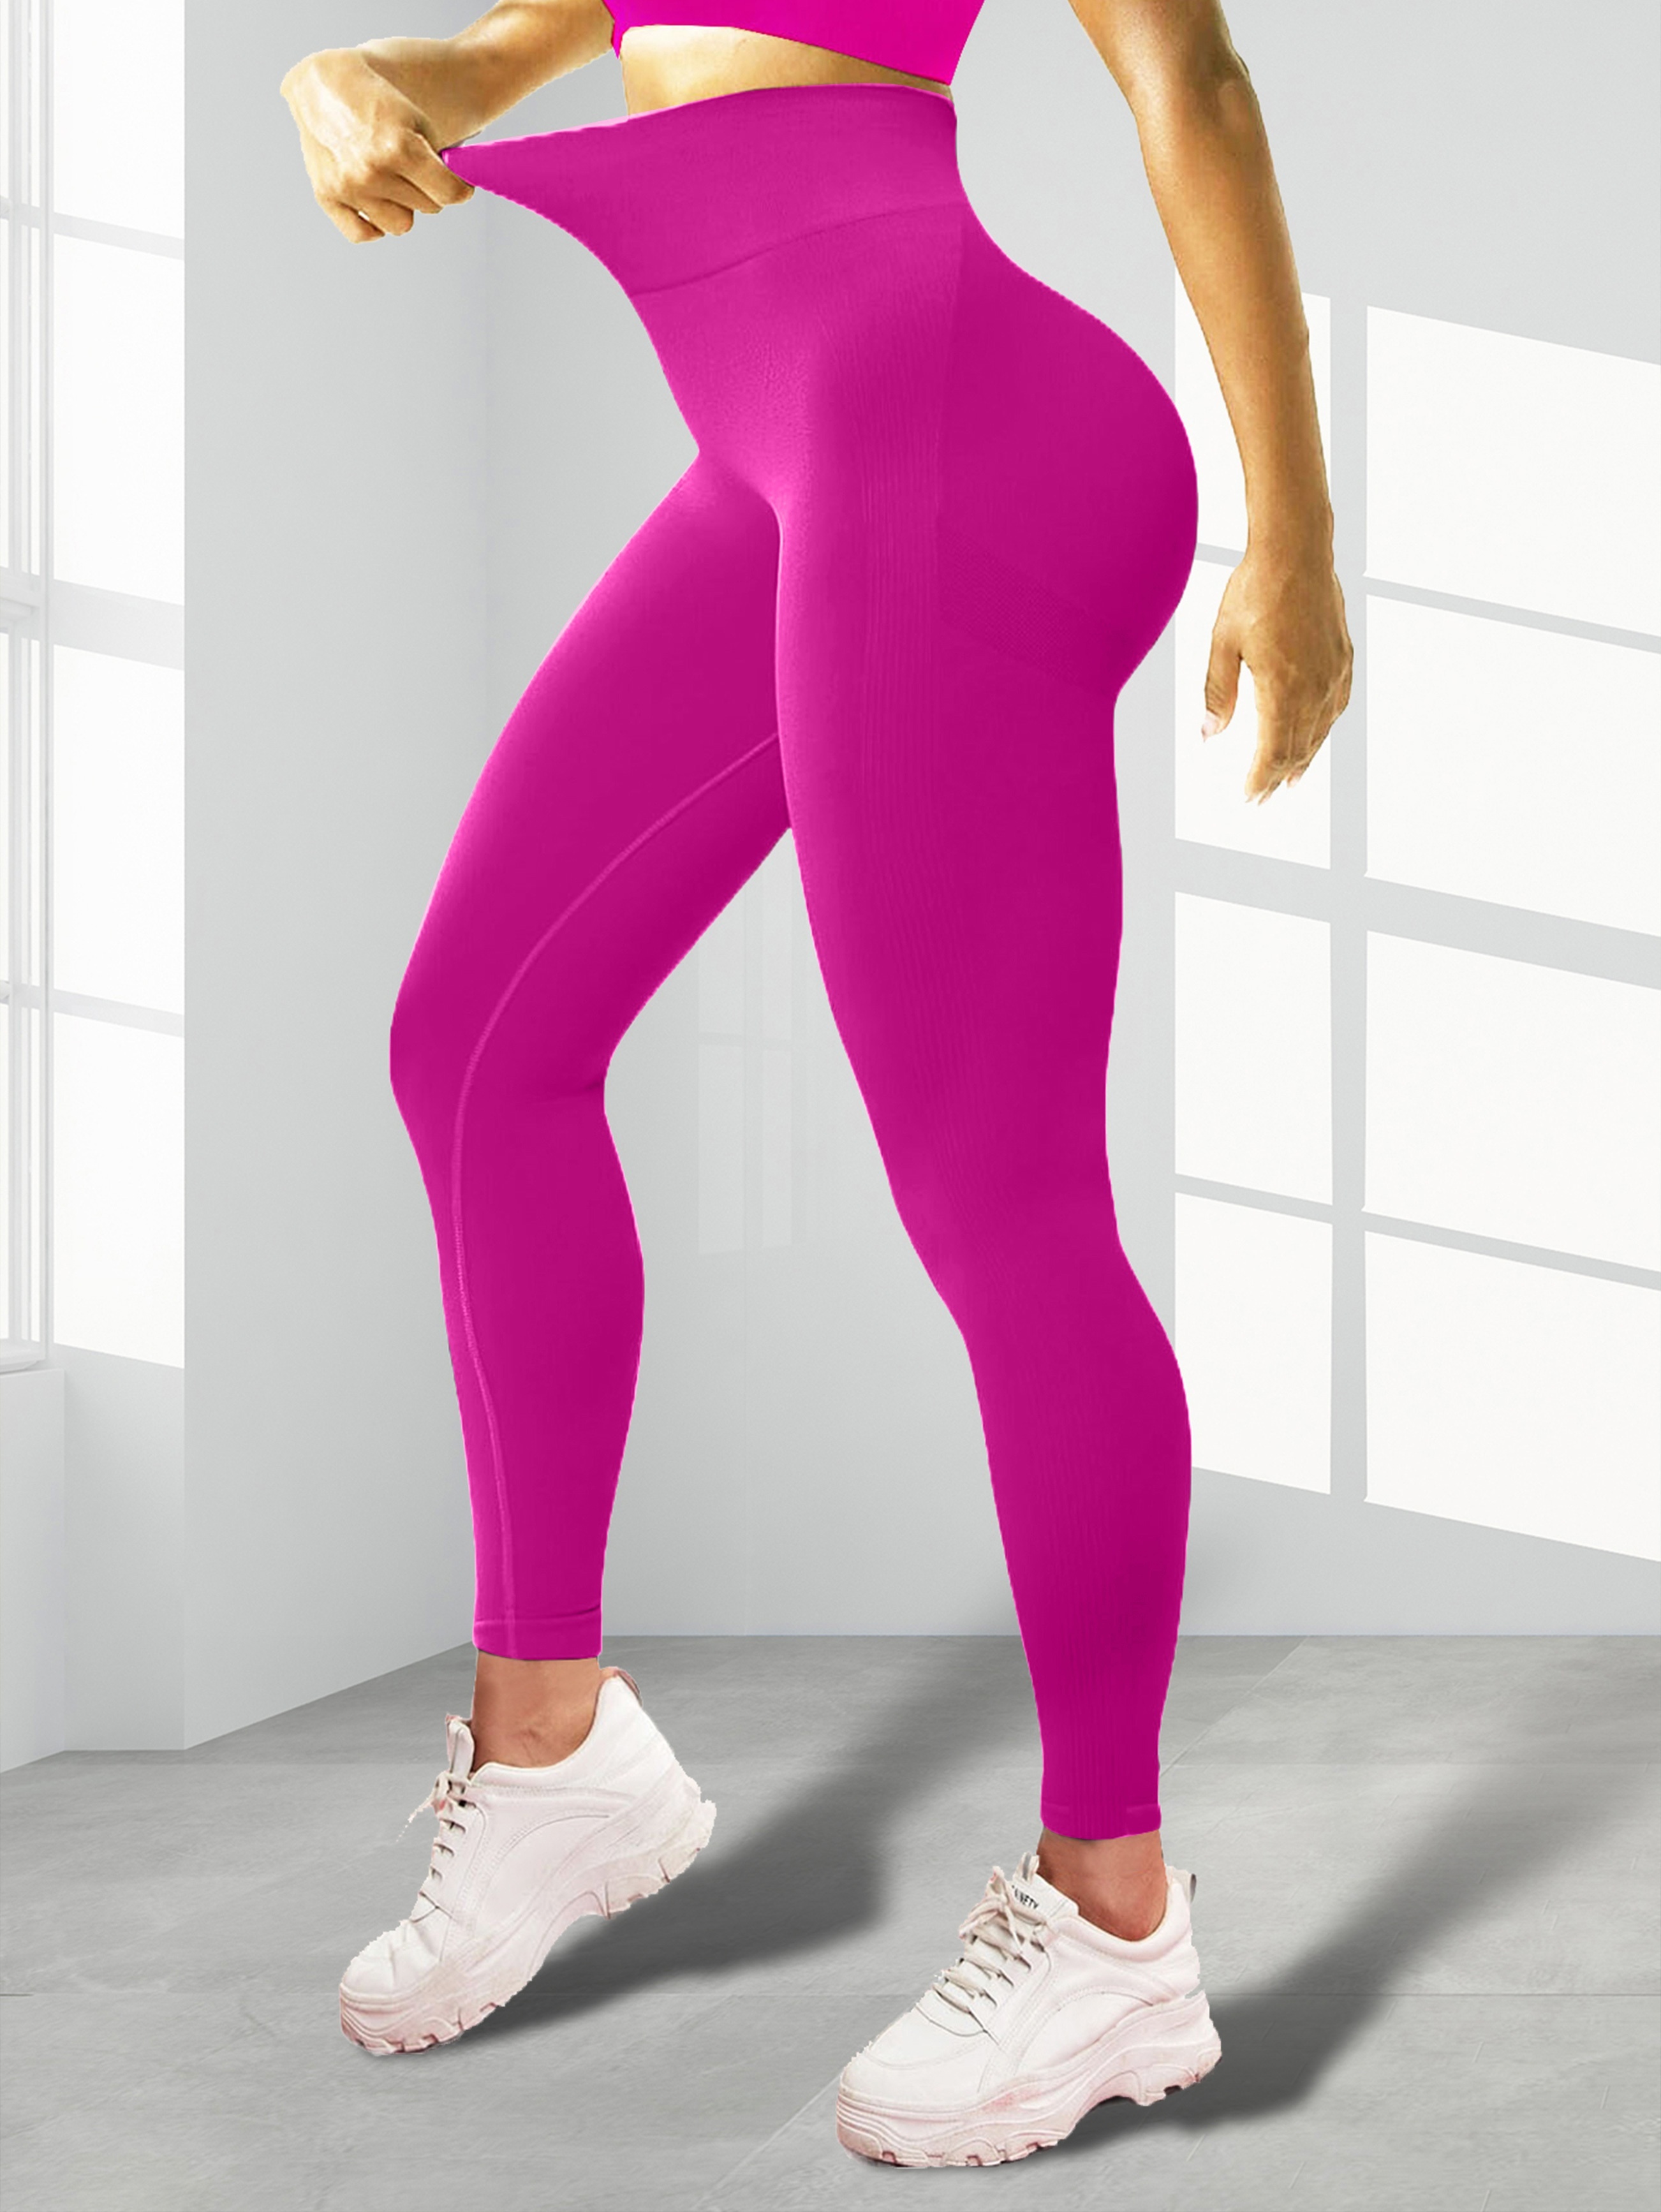 High Waist Seamless Yoga Tight Pants, Solid Color Fitness Workout